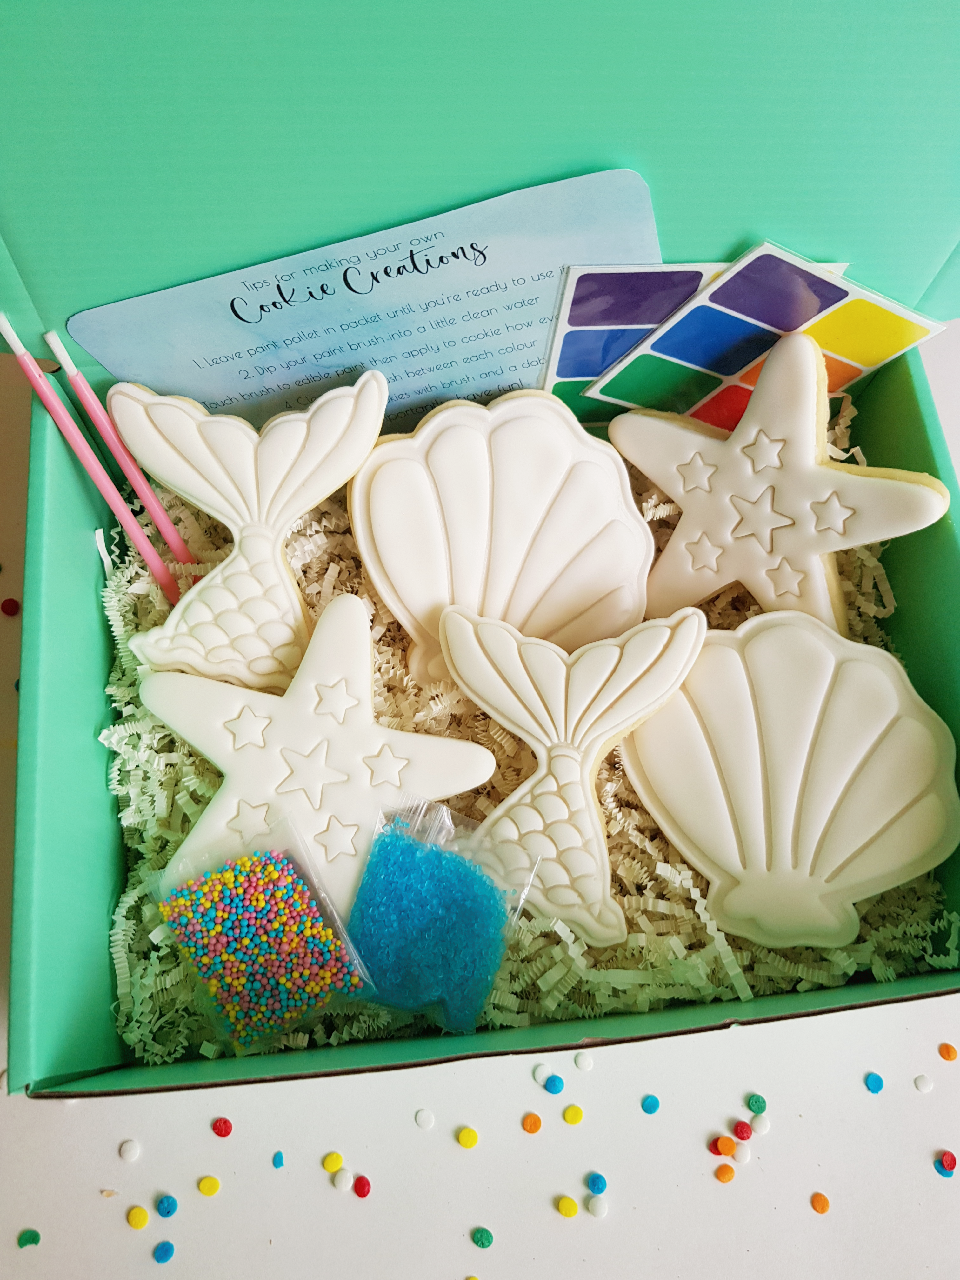 Paint Your Own Cookies Kits